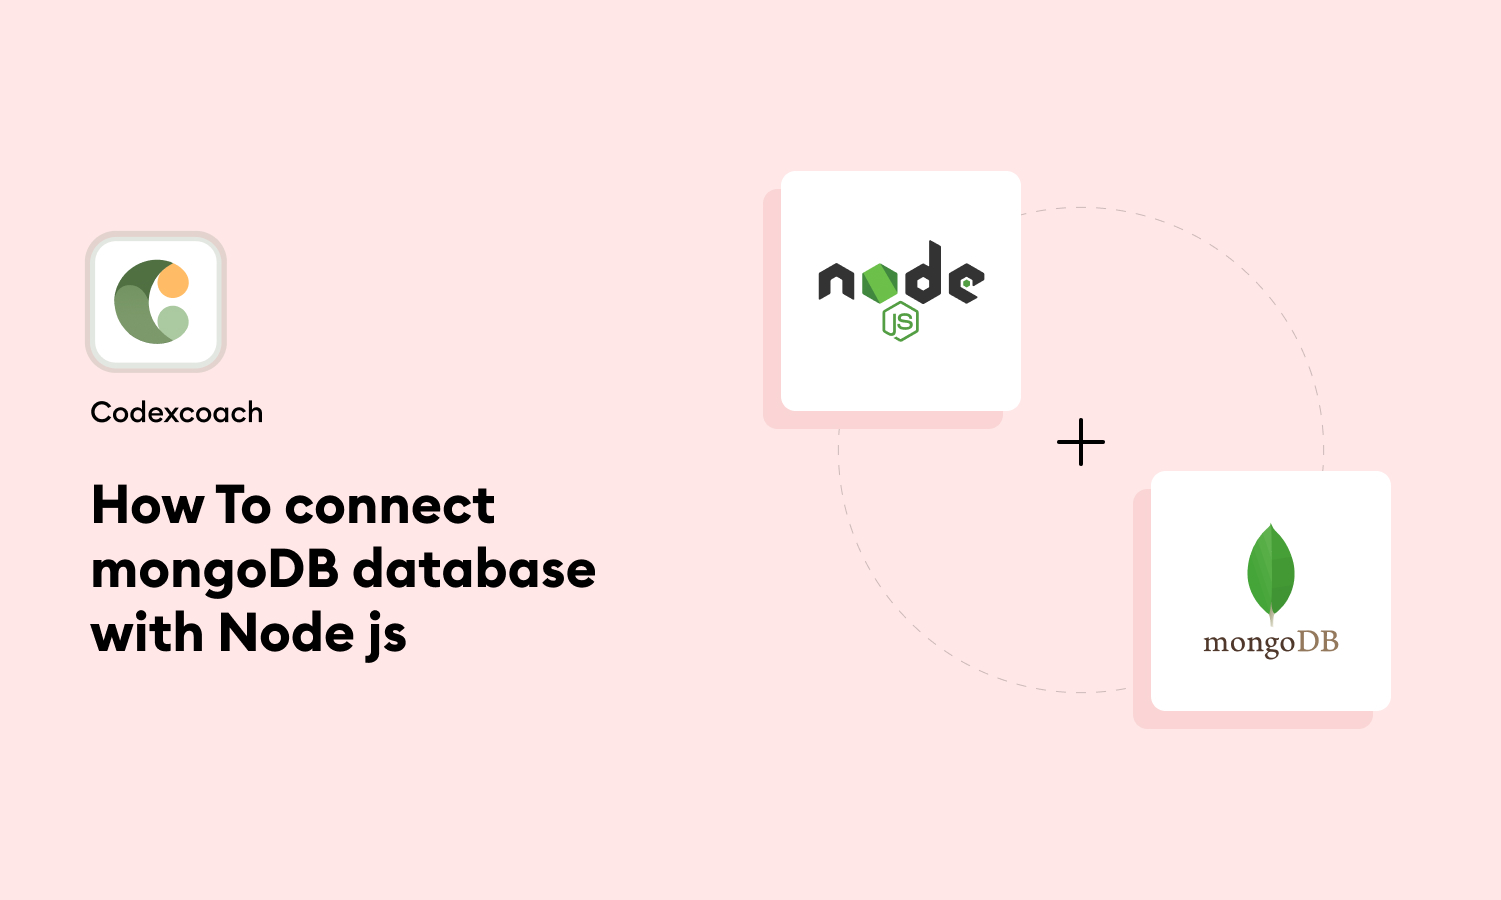 How To connect mongoDB database with Node js